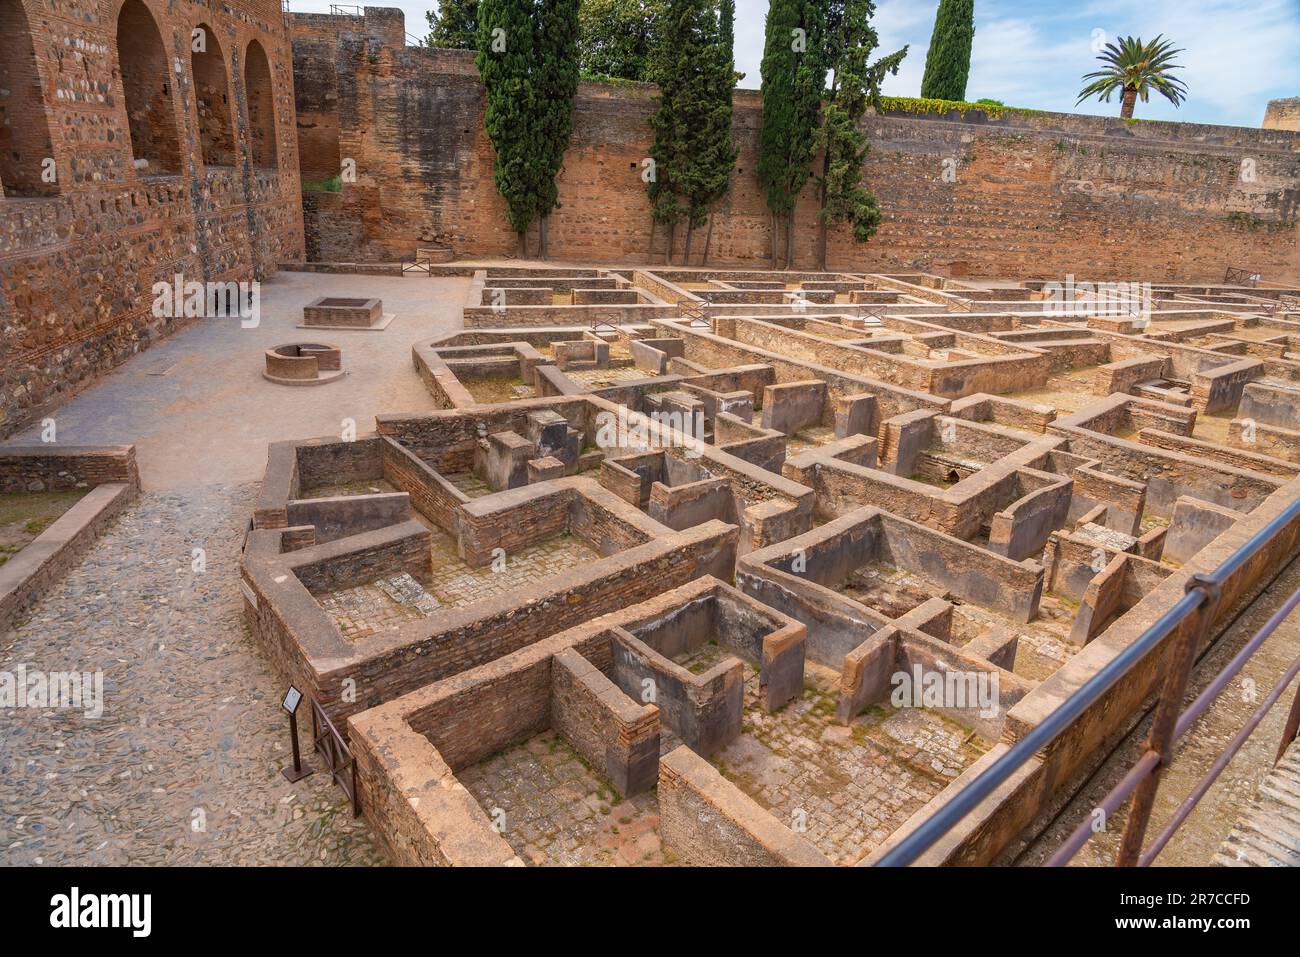 Buildings foundations at Plaza de Armas (Arms Square) inside Alcazaba area of Alhambra fortress - Granada, Andalusia, Spain Stock Photo